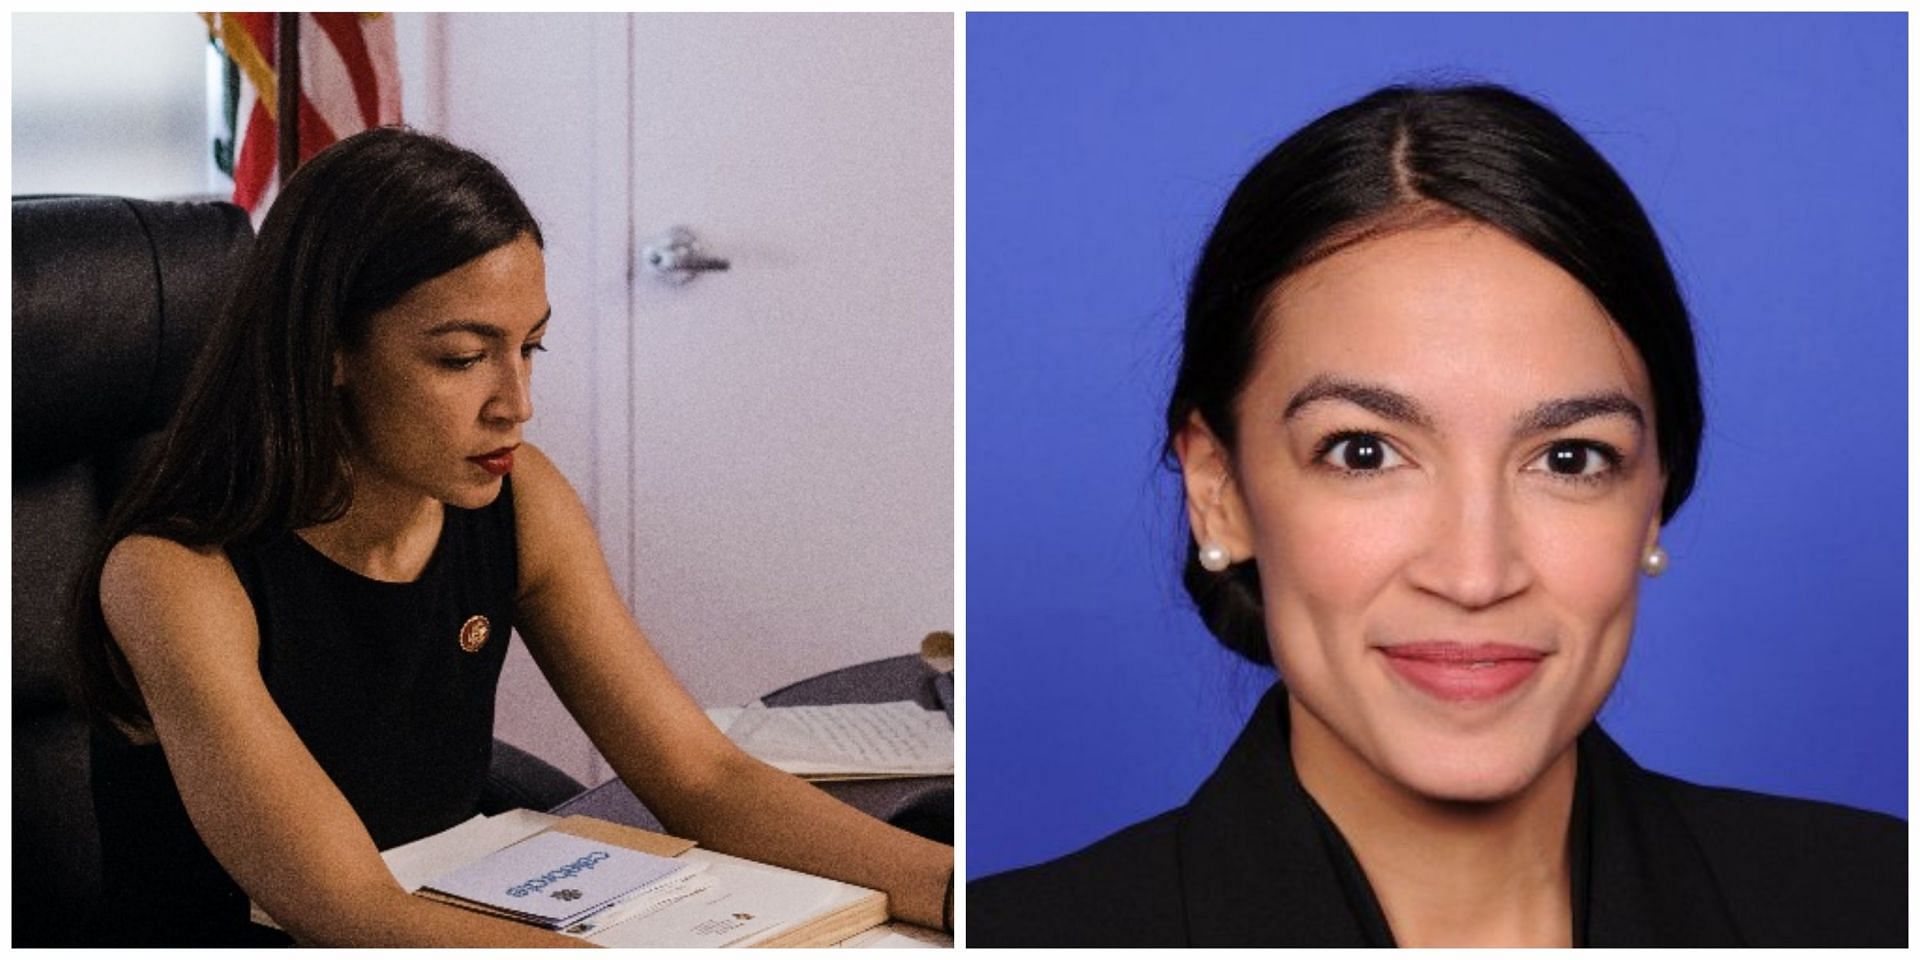 Social media users slammed AOC for her comments urging ceasefire in Israel amidst the Hamas attack: Reactions explored. (Image via @Alexandria Ocasio-Cortez/ Twitter)